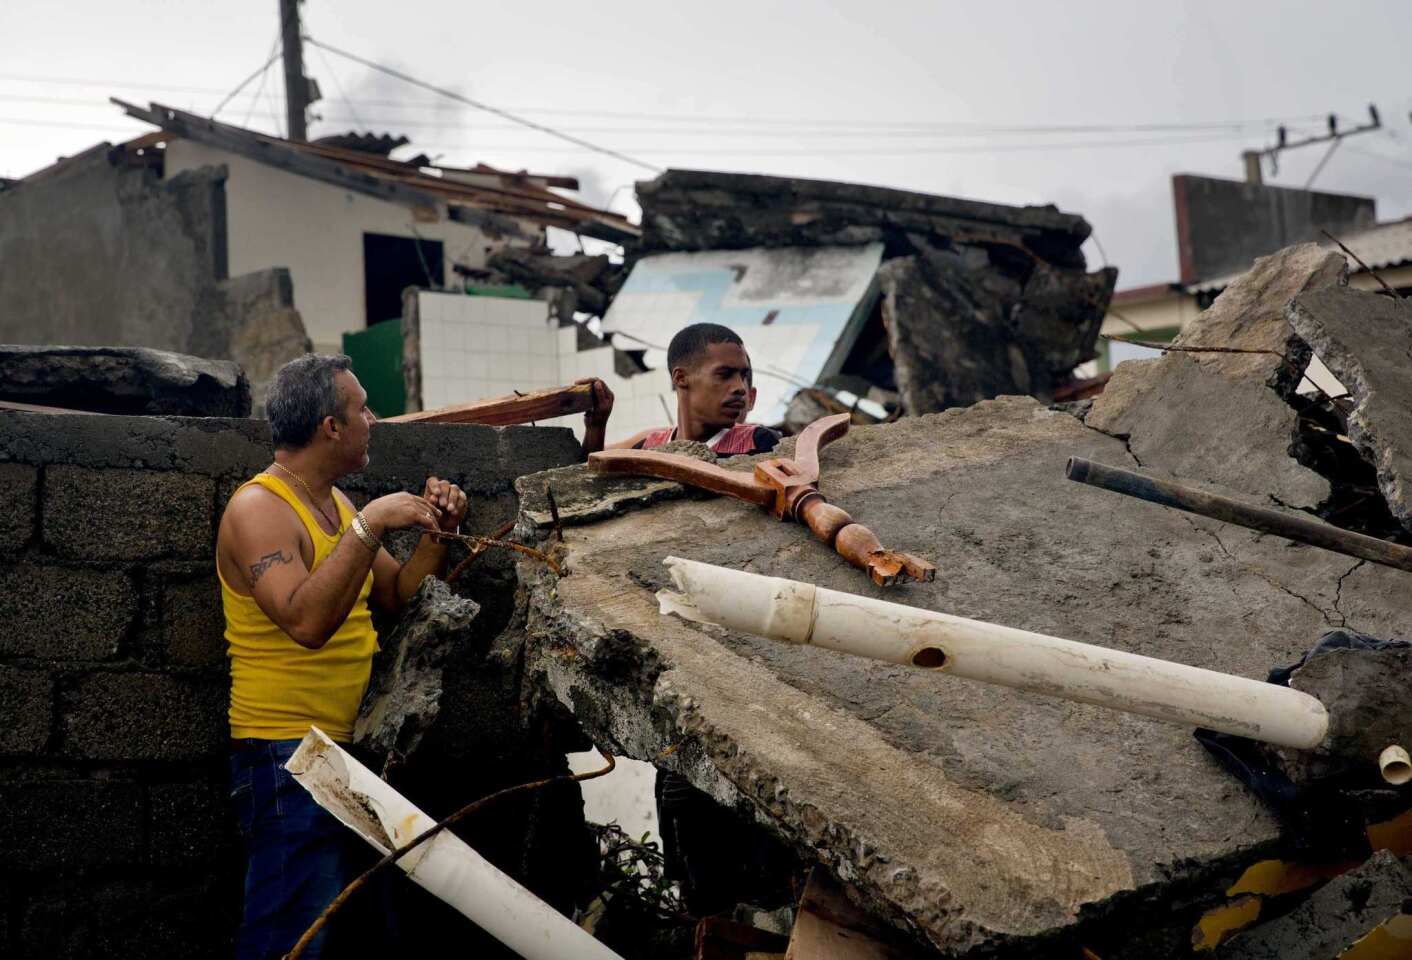 People look to salvage personal belongings from their homes damaged by Hurricane Matthew in Baracoa, Cuba, Wednesday, Oct. 5, 2016.